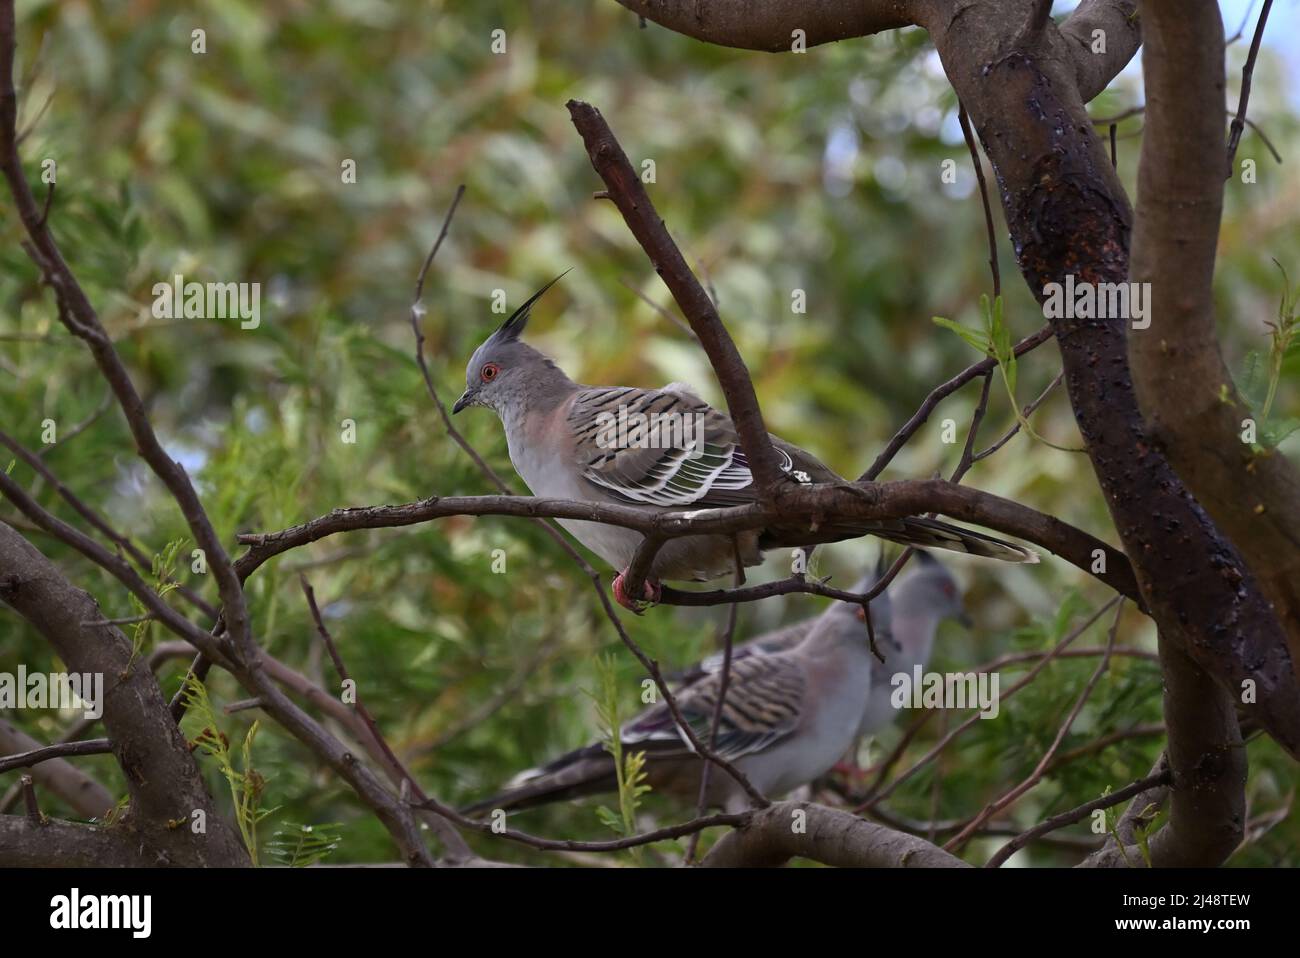 Grey crested pigeon, ocyphaps lophotes, perched on a tree branch, with two more crested pigeons lurking in the background Stock Photo